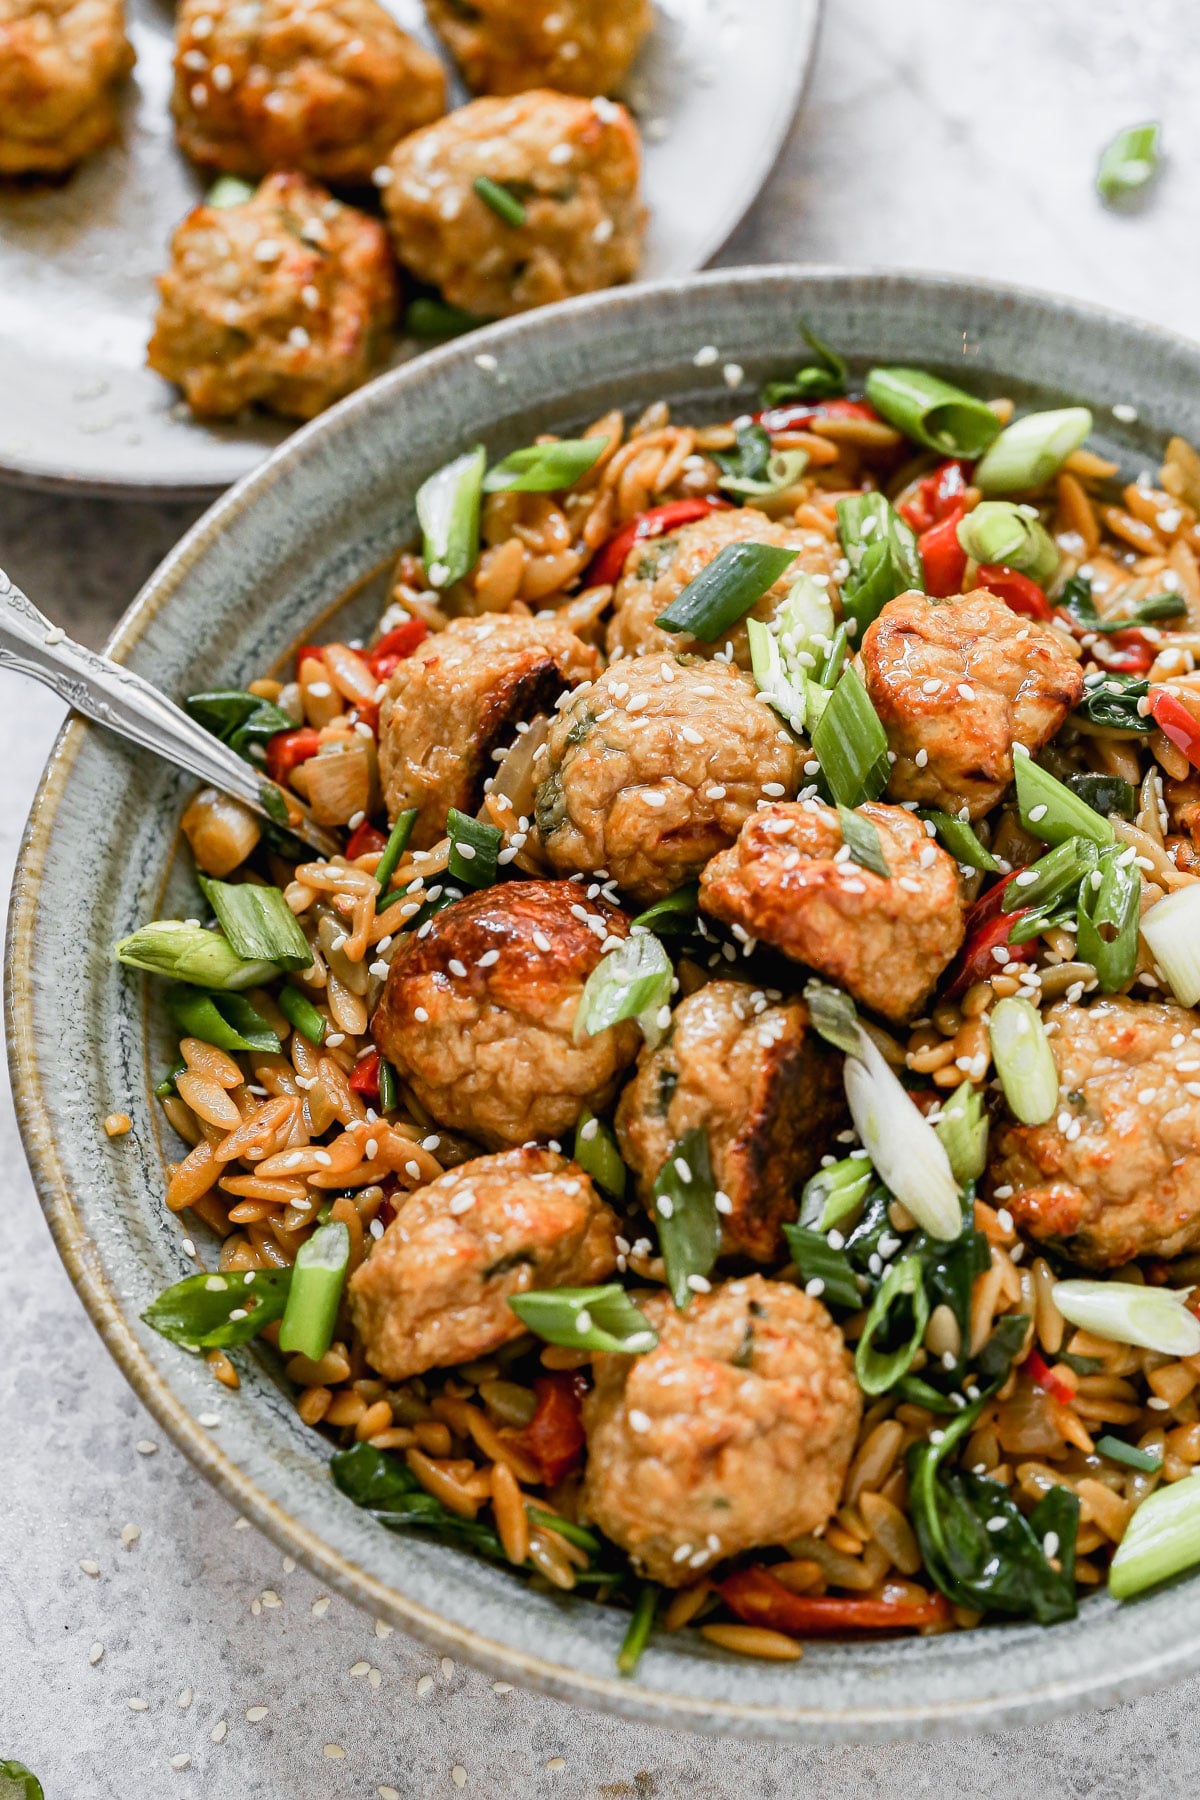 Our current favorite was to do meatballs: Asian Chicken Meatballs with Saucy Sesame and Hoisin Orzo. This fun spin on a classic pairs tender, garlic and ginger BAKED meatballs with an orzo full of veggies and an addictive sauce you'll want to lick with the a spoon. Prep ahead and eat later in the week! 